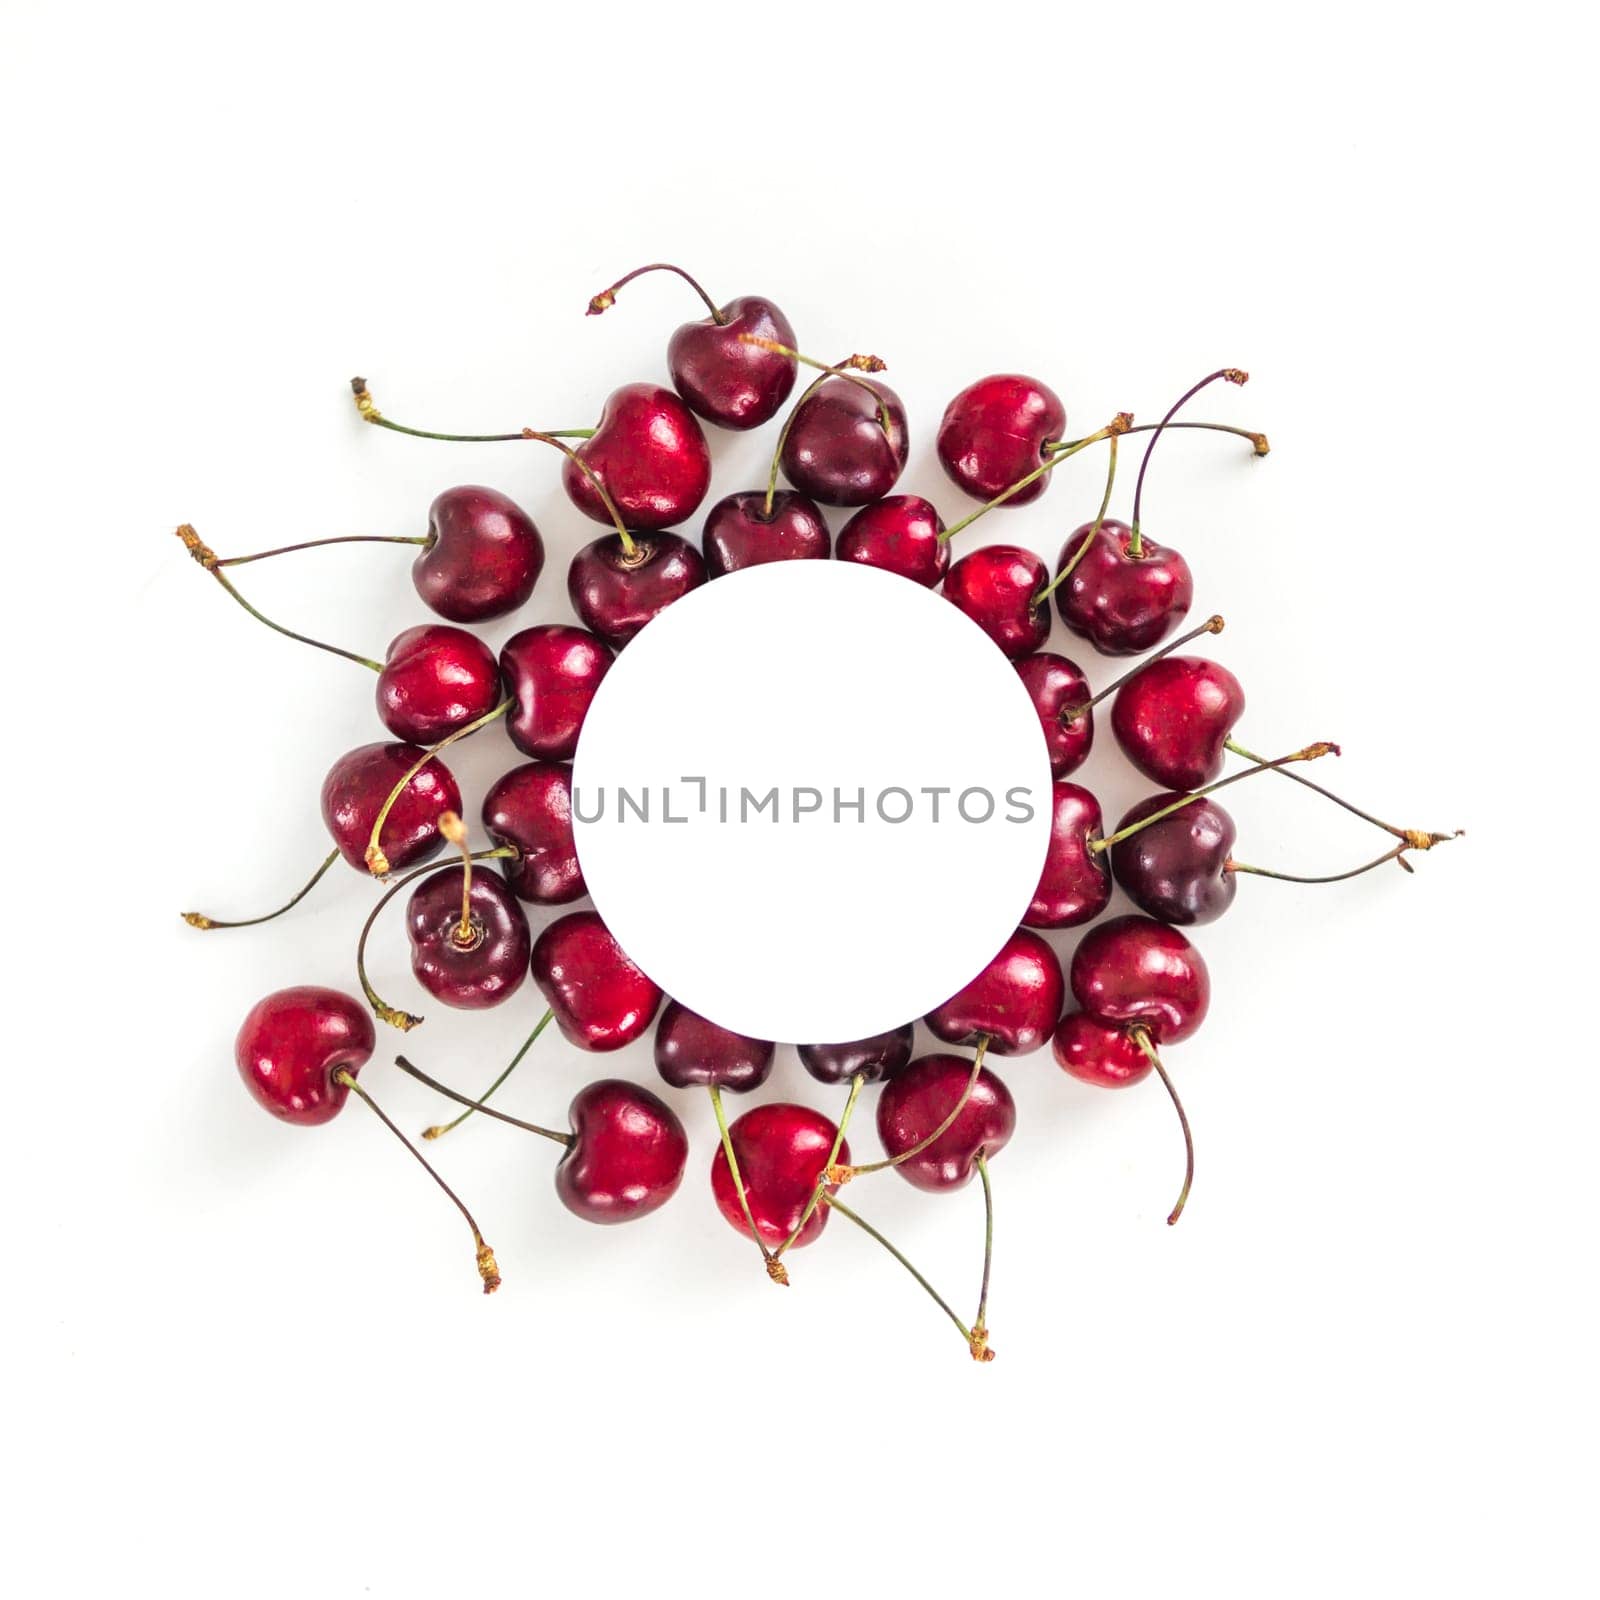 Cherry isolated on white with white circle by fascinadora